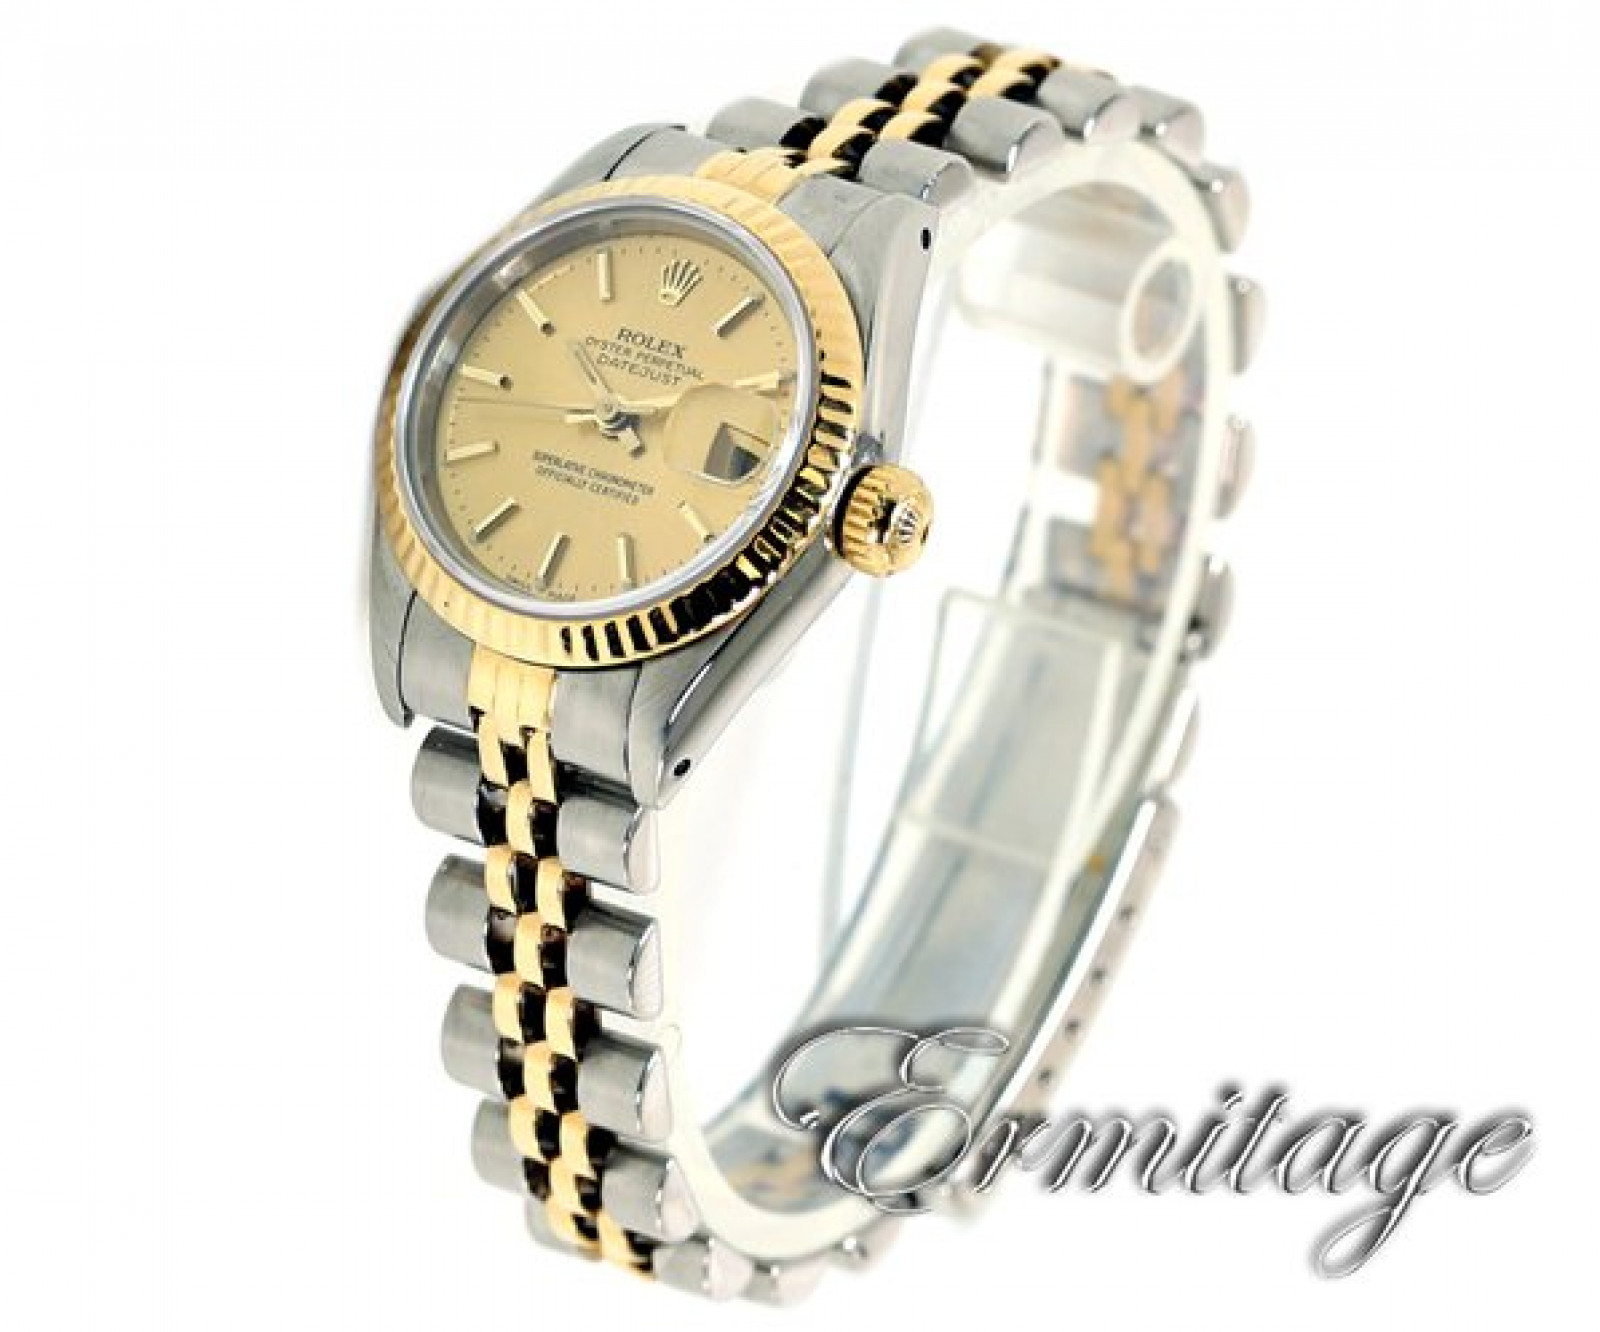 Pre-Owned Gold & Steel Rolex Datejust 69173 Year 1983